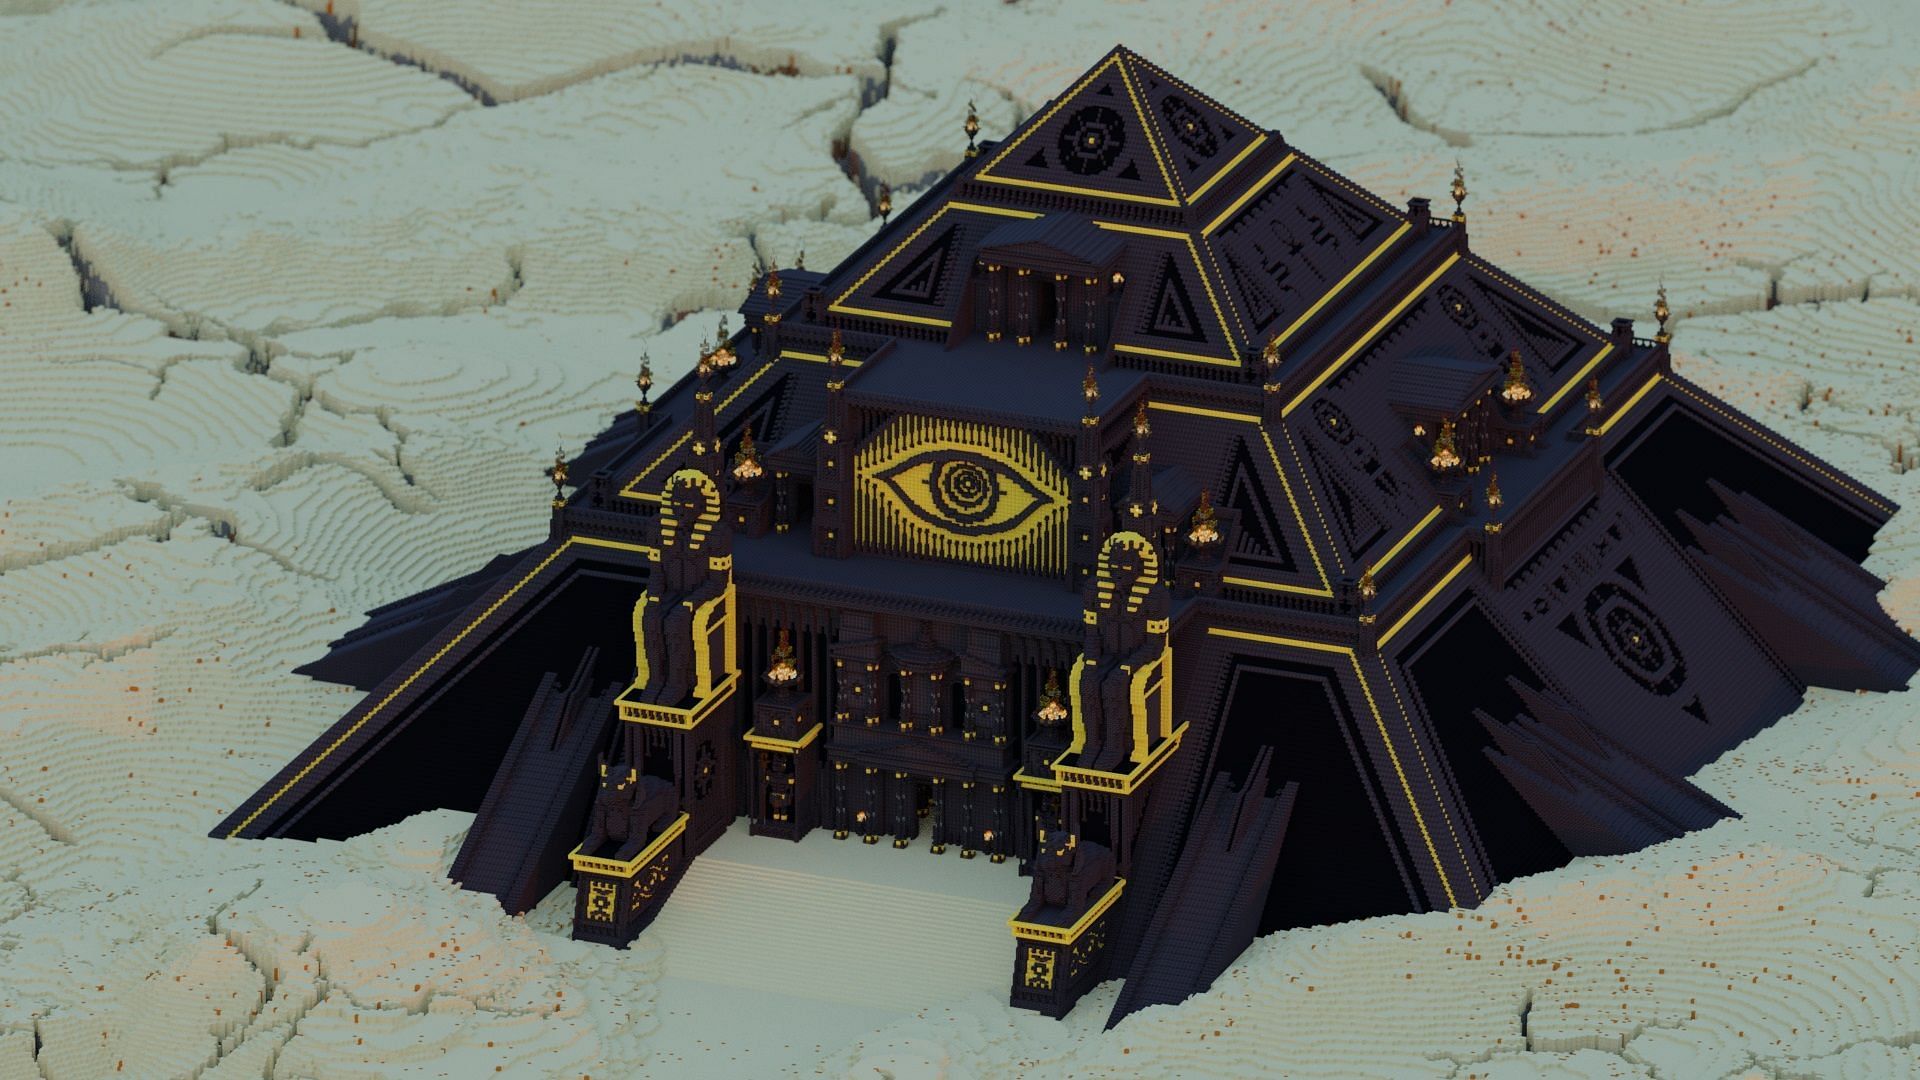 A renovated desert pyramid with a much more sinister appearance (Image via u/TrixyBlox-Oscip/Reddit)